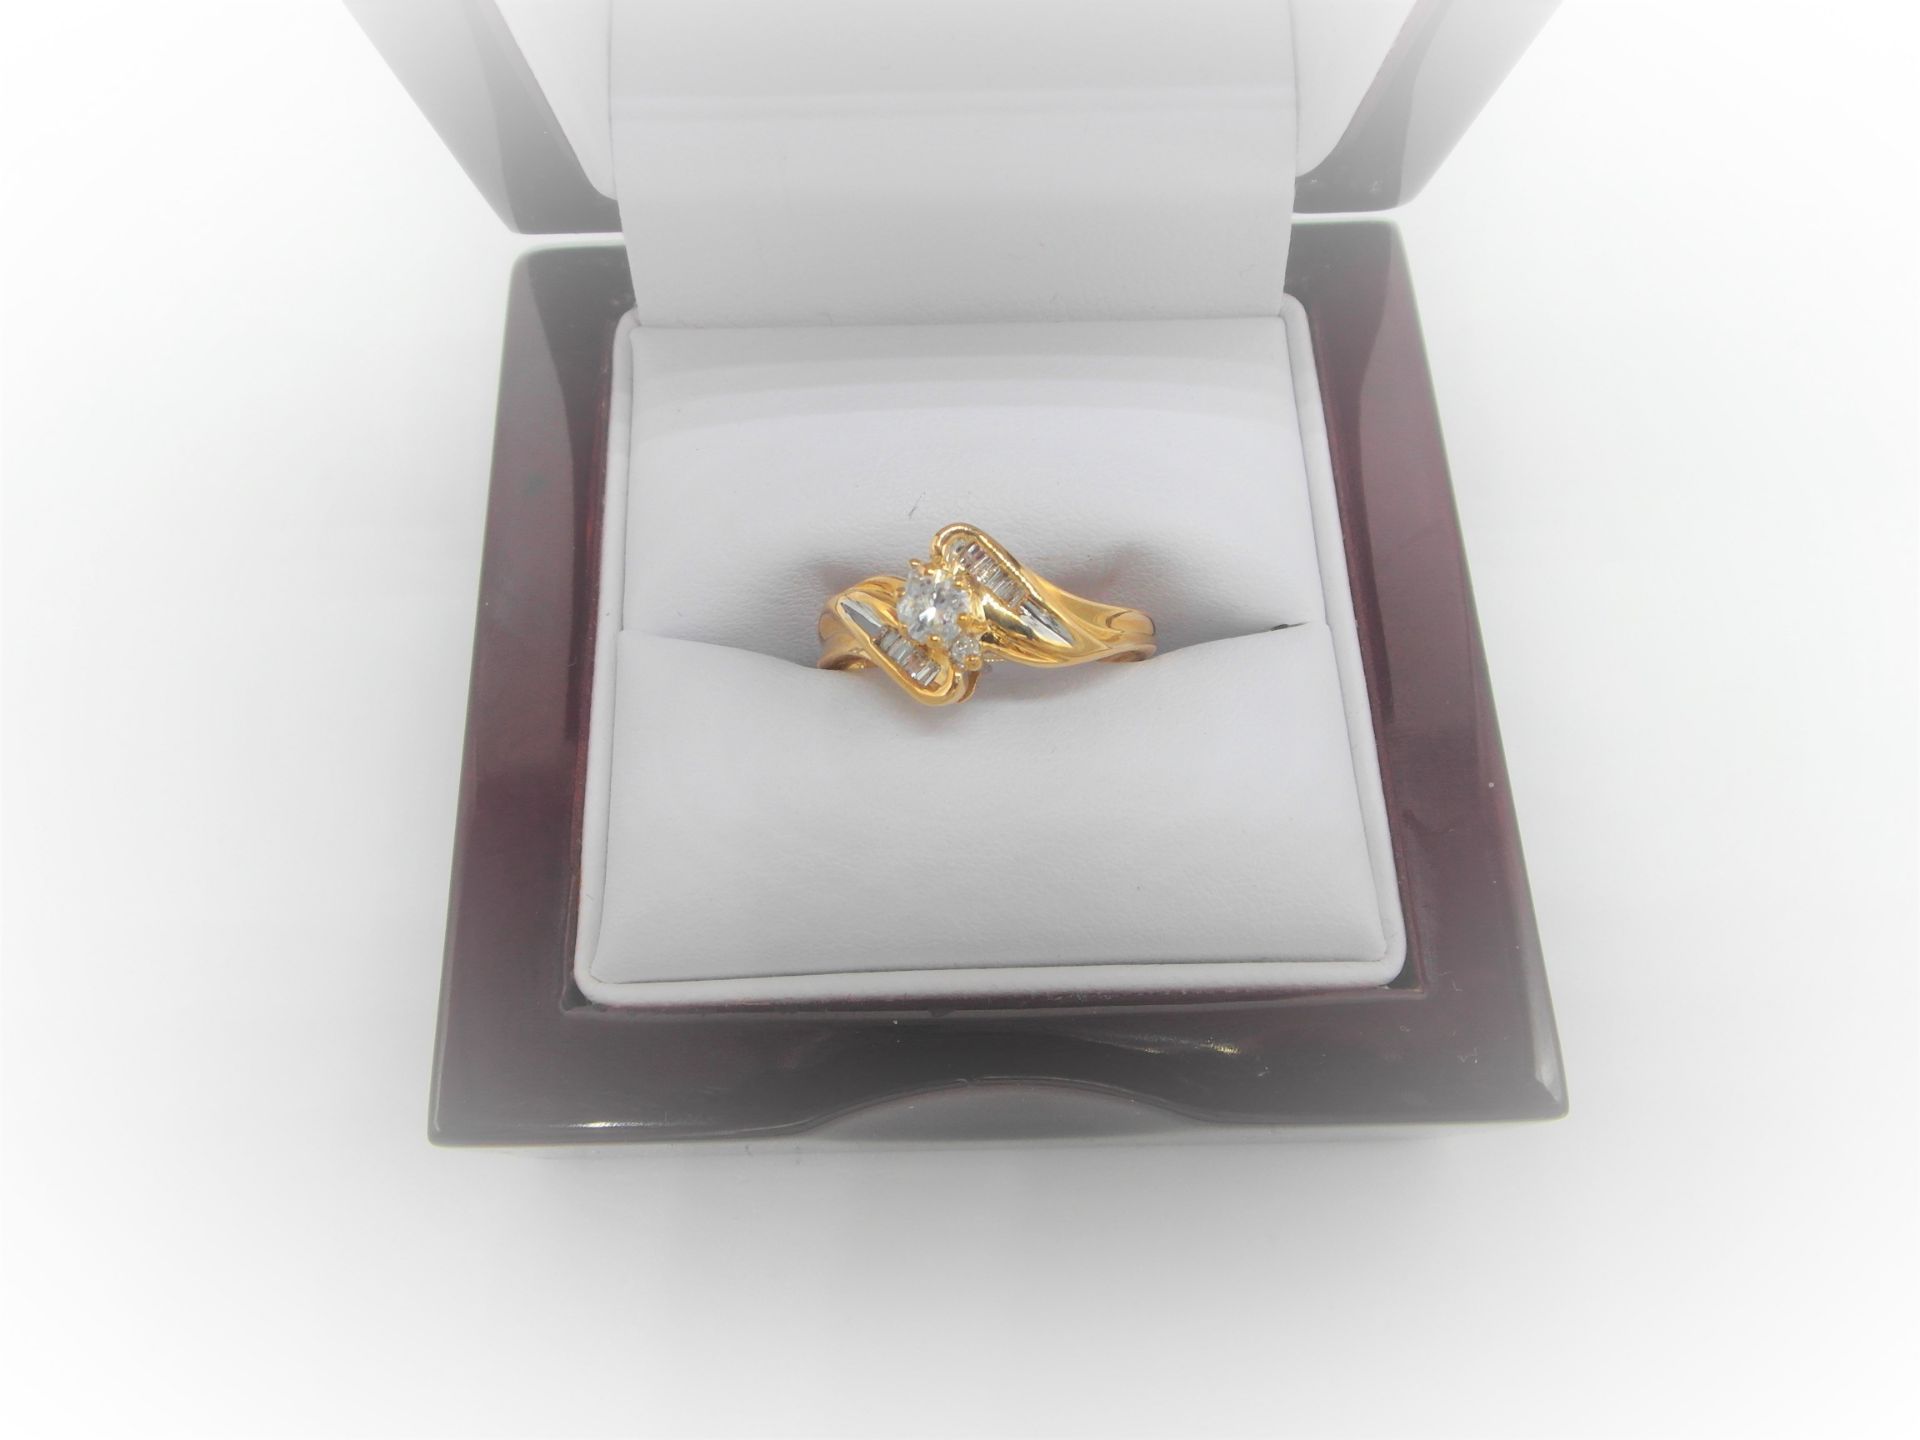 10Ct Yellow Gold Diamond Set Crossover Ring - Image 3 of 4